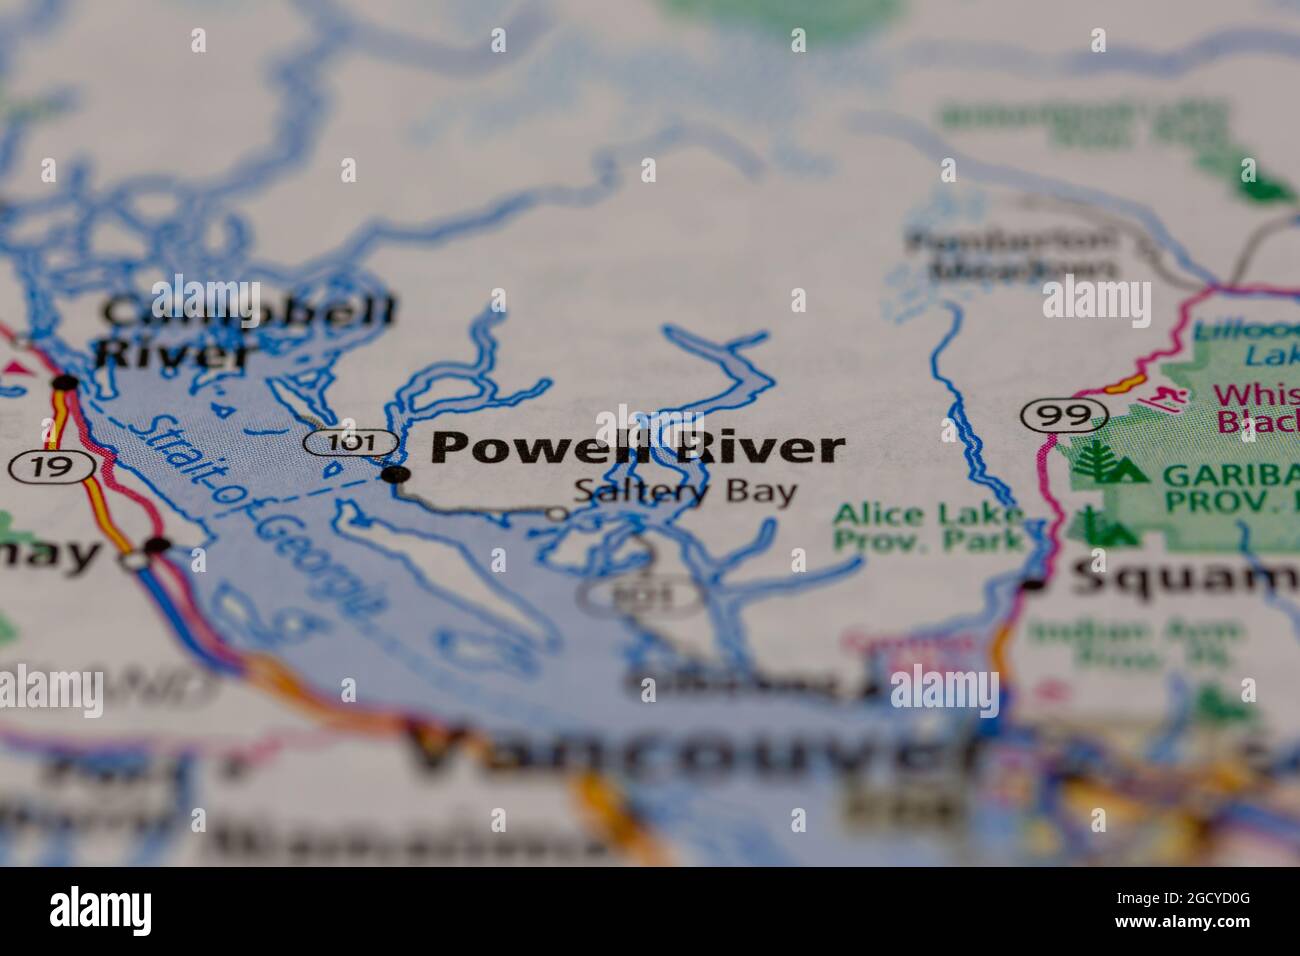 Powell River British Columbia Canada shown on a road map or Geography map Stock Photo